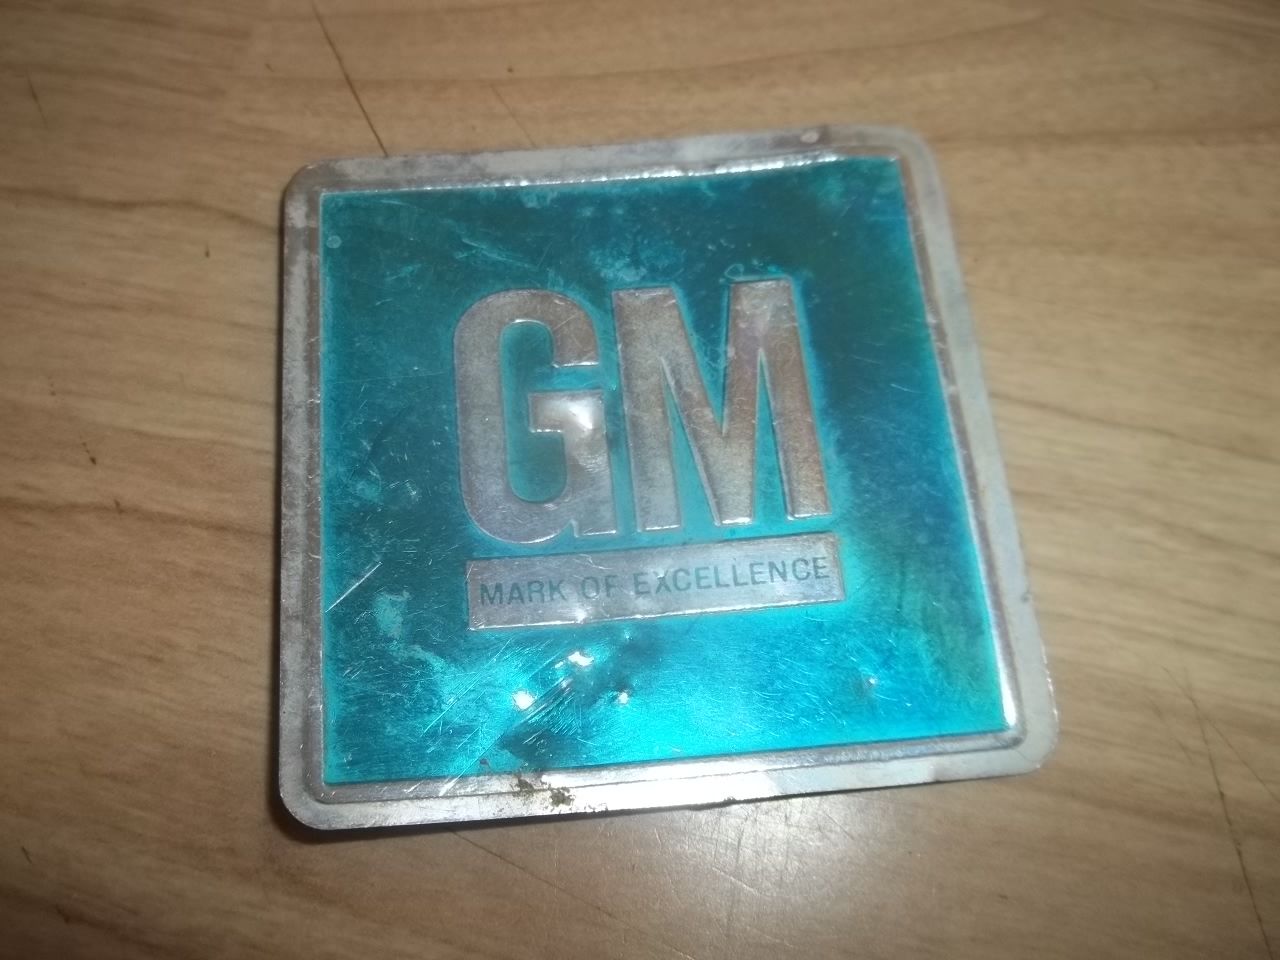 The GM's Mark of Excellence plate